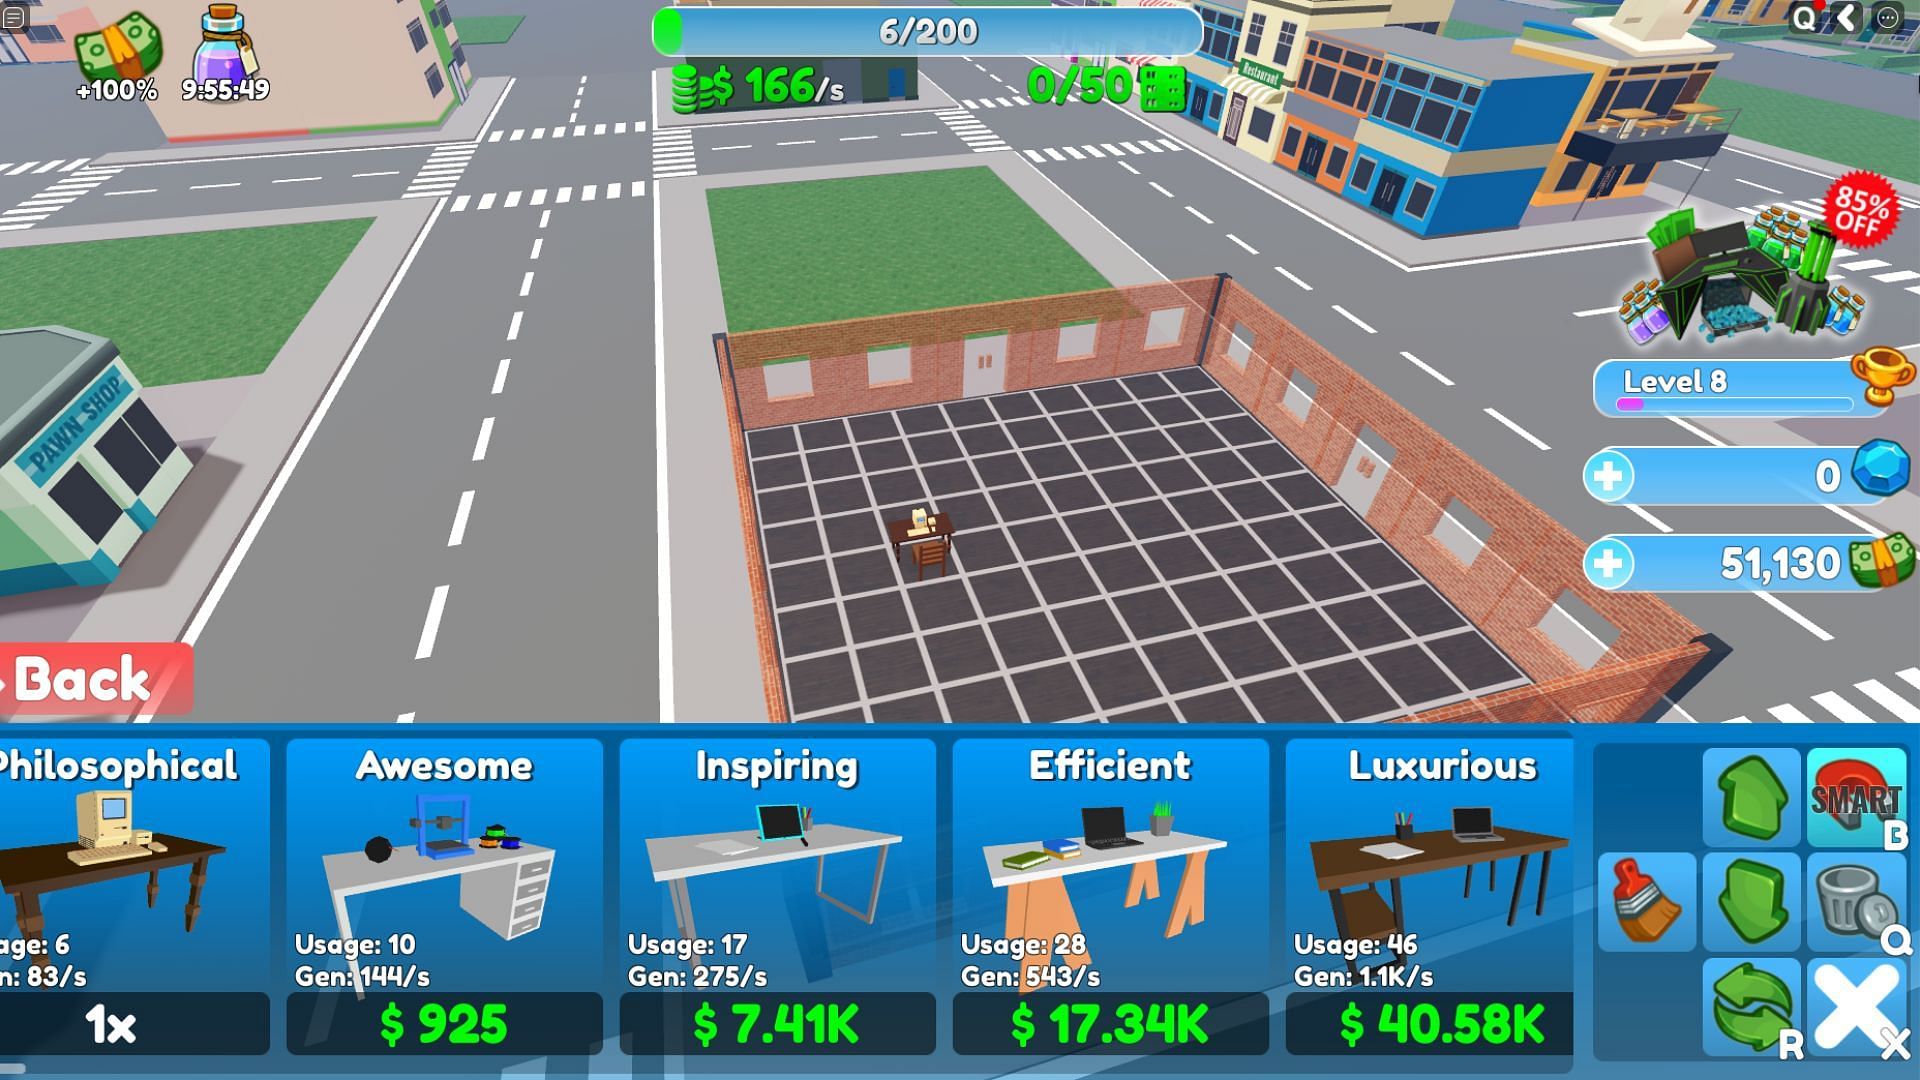 Customize your own office in Hacker Tycoon (Image via Roblox)